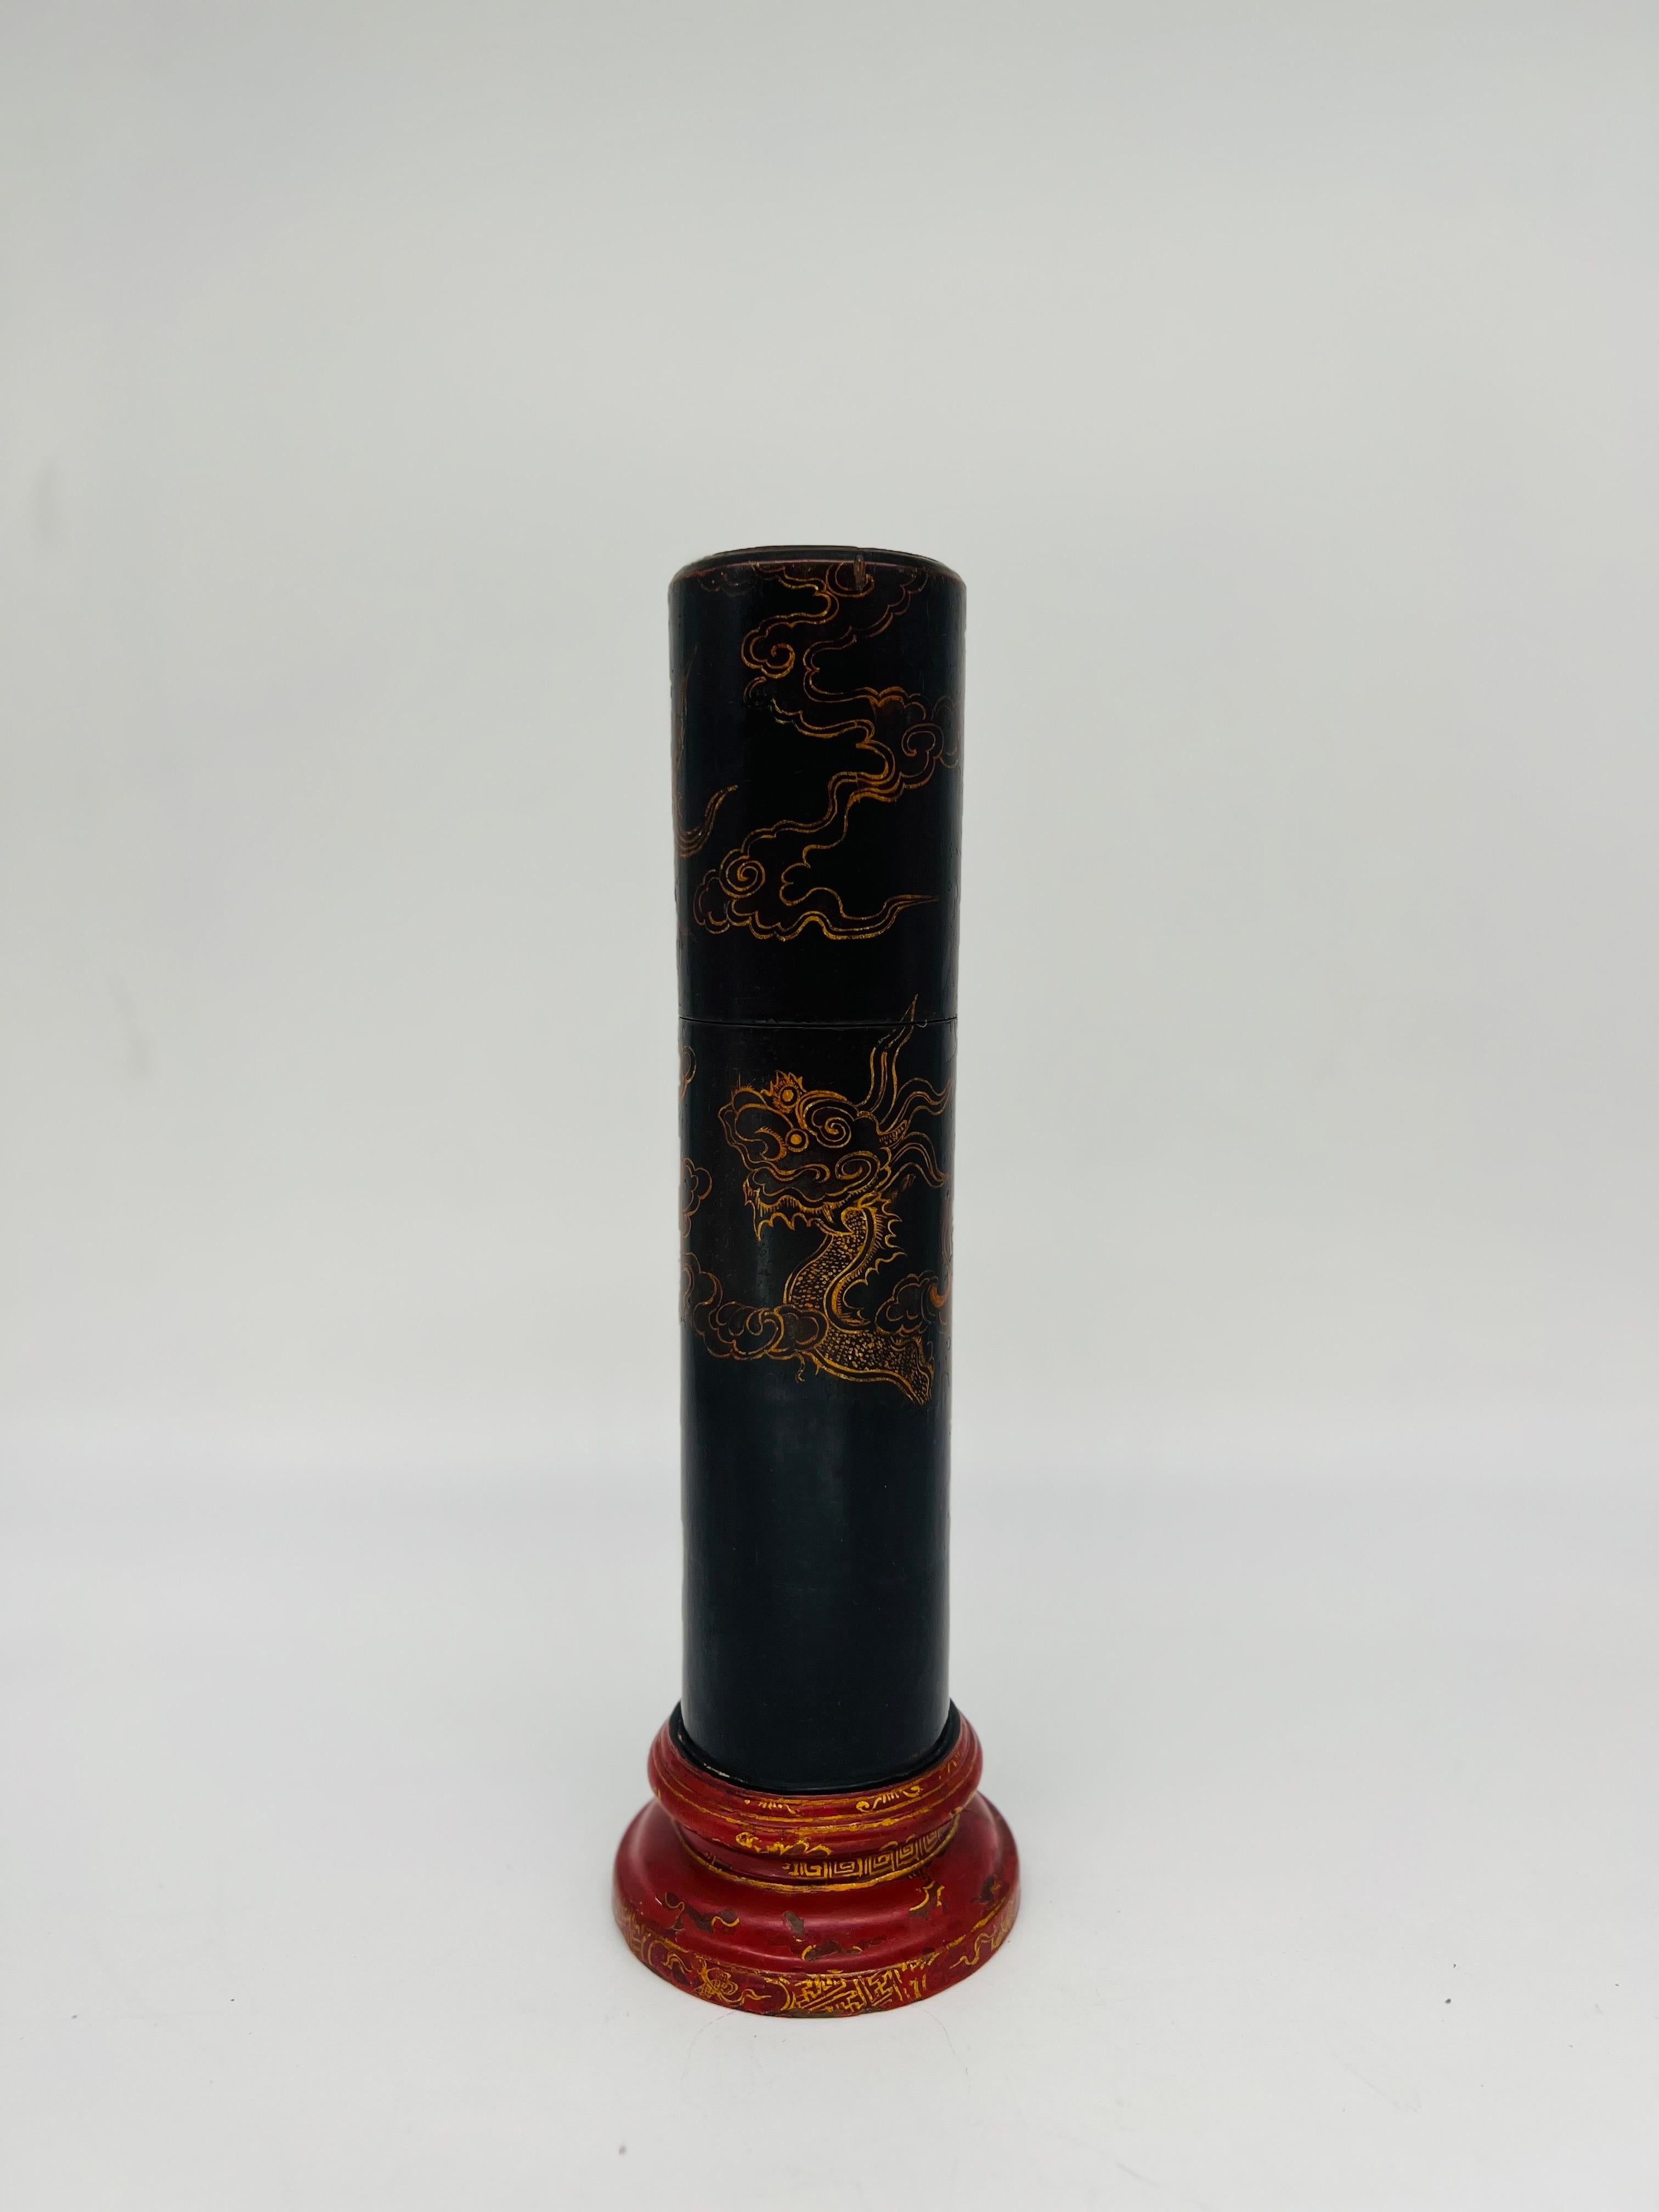 A fine vintage match-strike box. The box, likely of Japanese origin features a cylindrical body heavily decorated with a black lacquer paint and embellished with gilt a clawed dragon. The base is a stepped red lacquer with geometric pattern and the